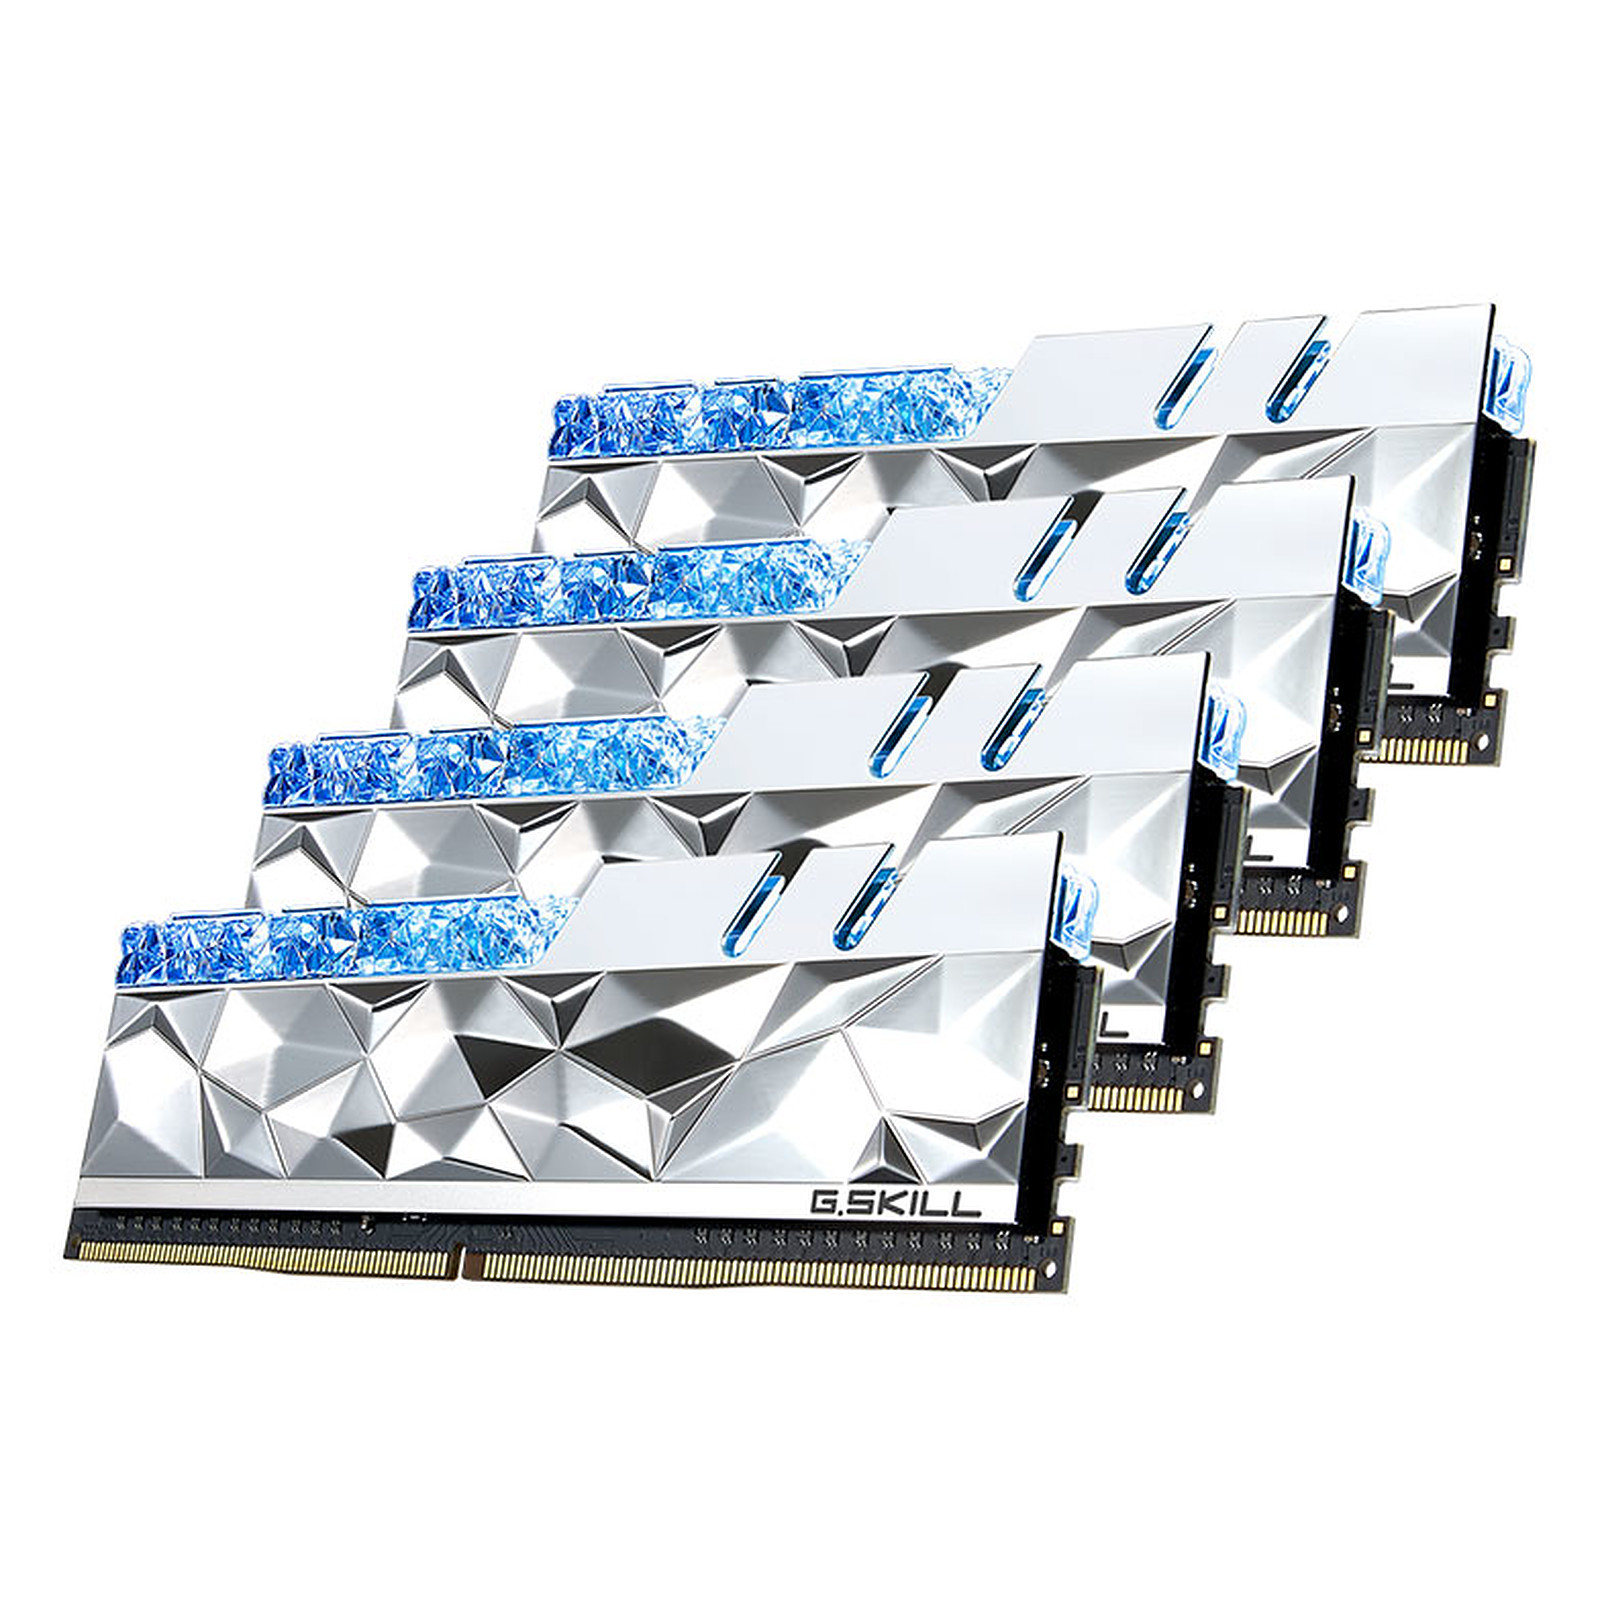 G.Skill Trident Z Royal Elite 64 Go (4 x 16 Go) DDR4 4266 MHz CL19 - Argent · Occasion - Memoire PC G.Skill - Occasion